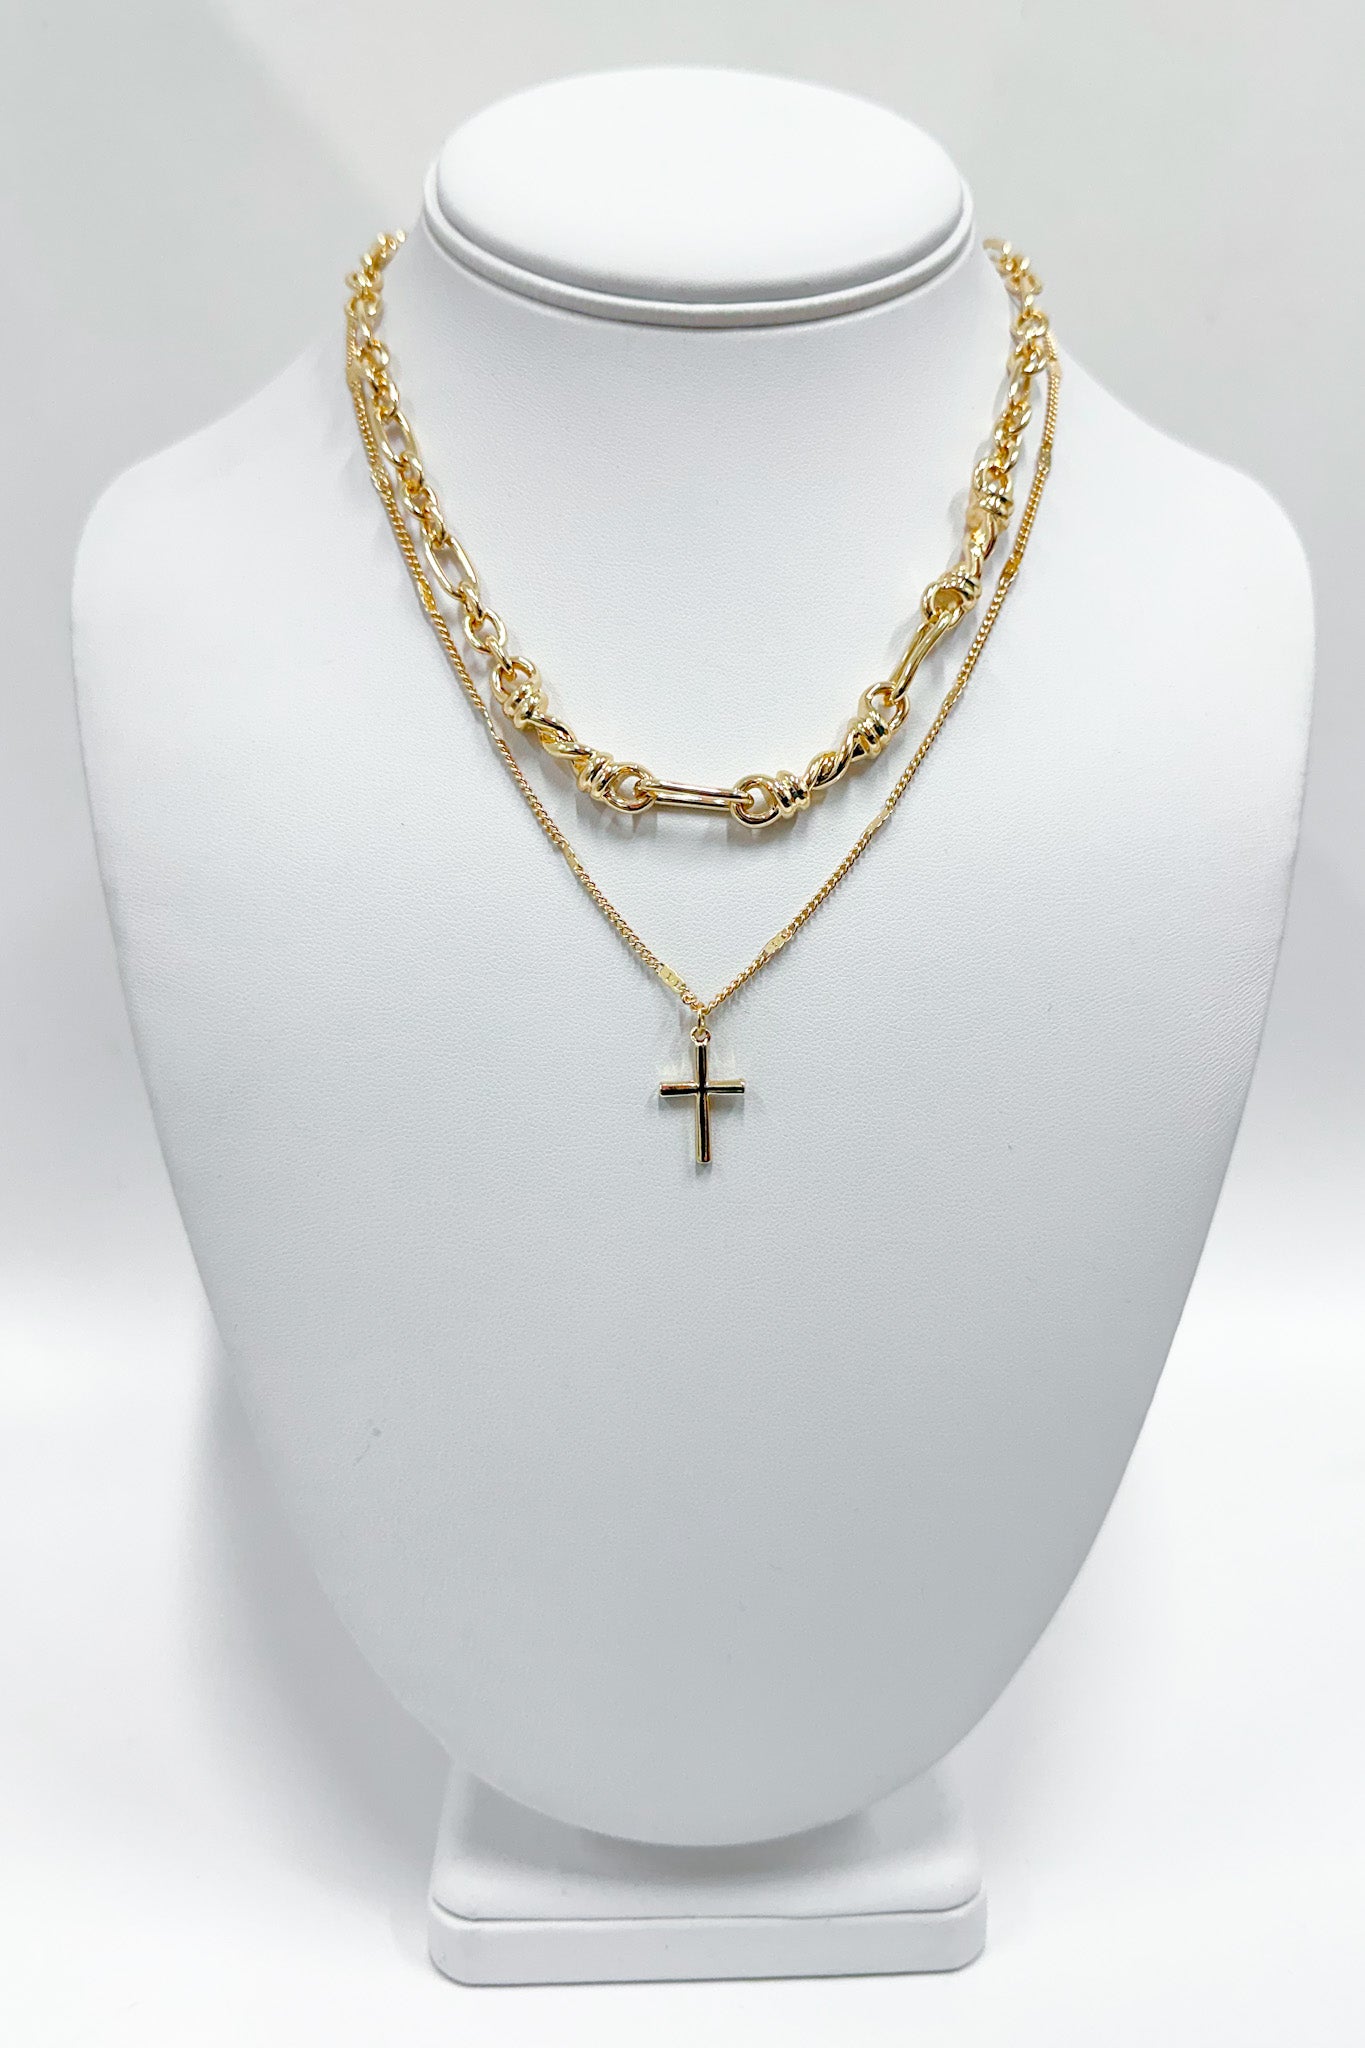 Gold Metallic Muse Cross Layered Chain Necklace - BACK IN STOCK - Madison and Mallory